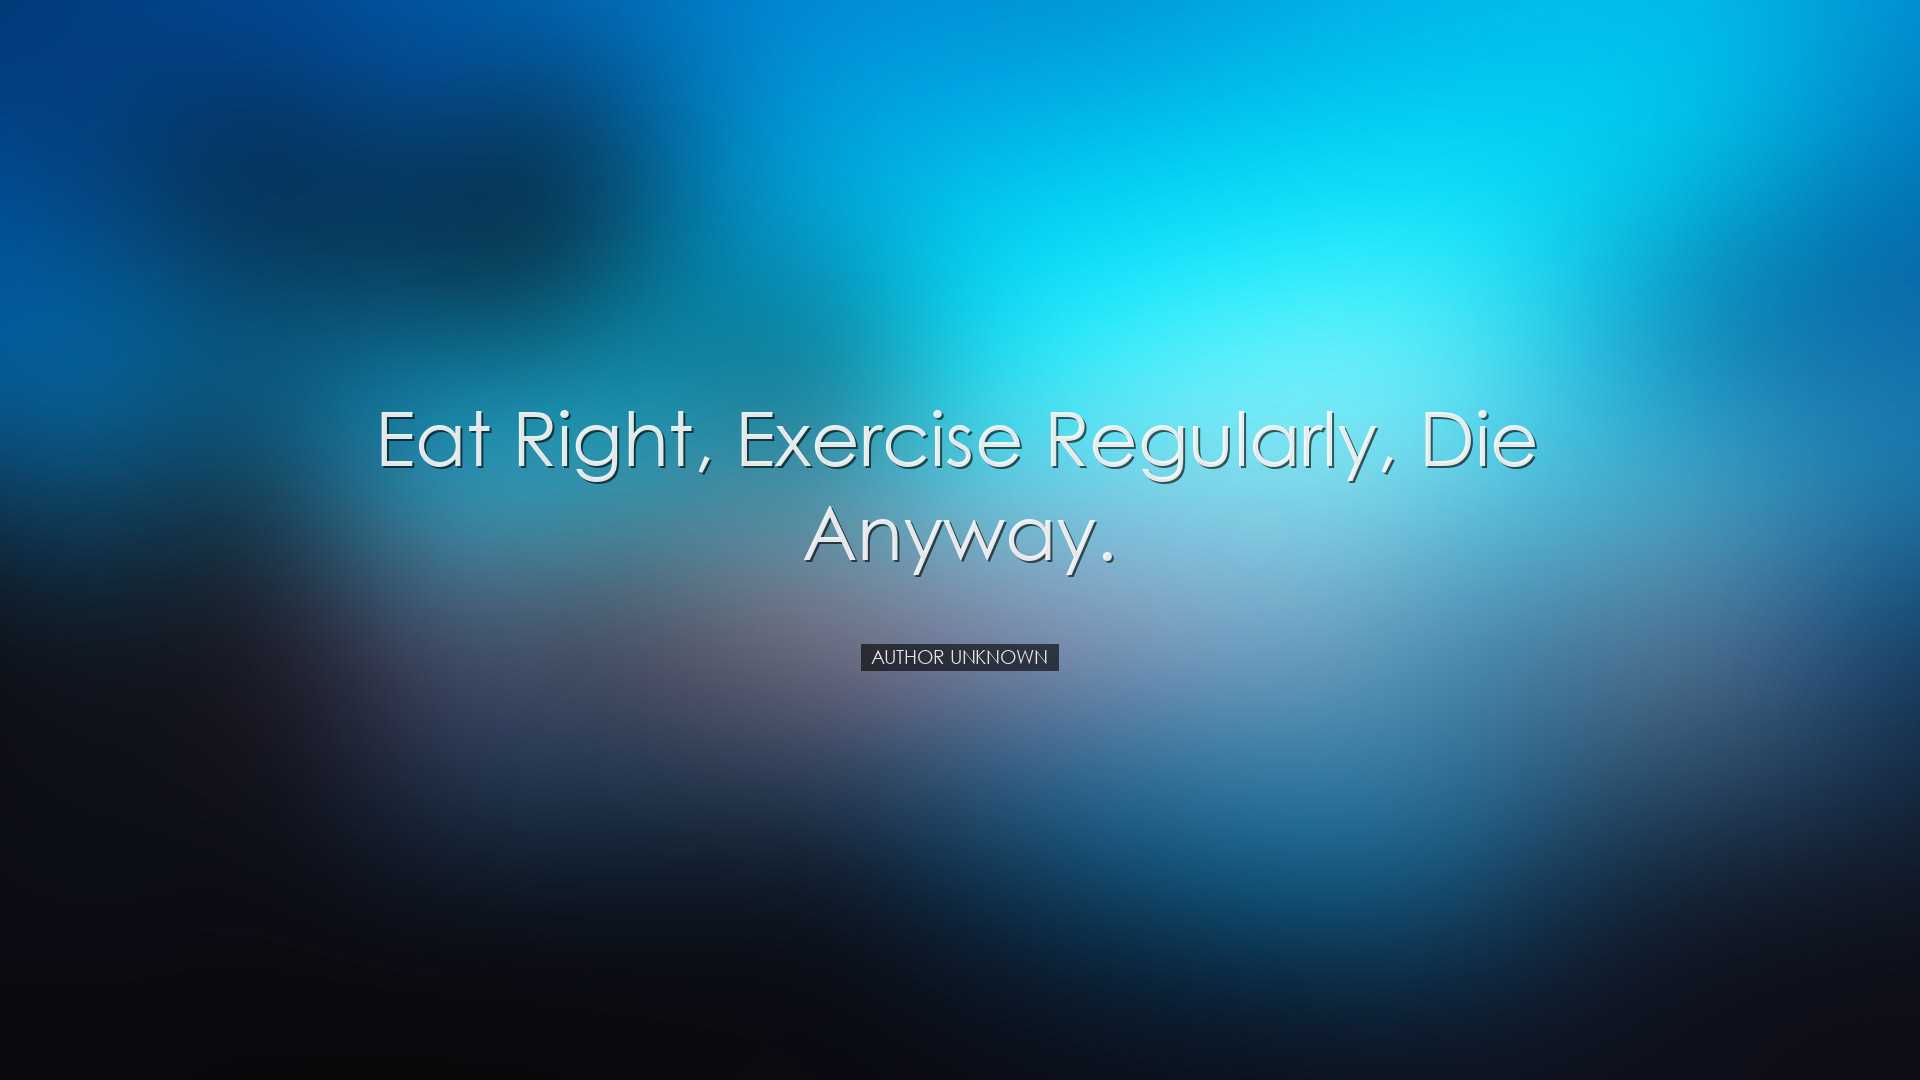 Eat right, exercise regularly, die anyway. - Author Unknown